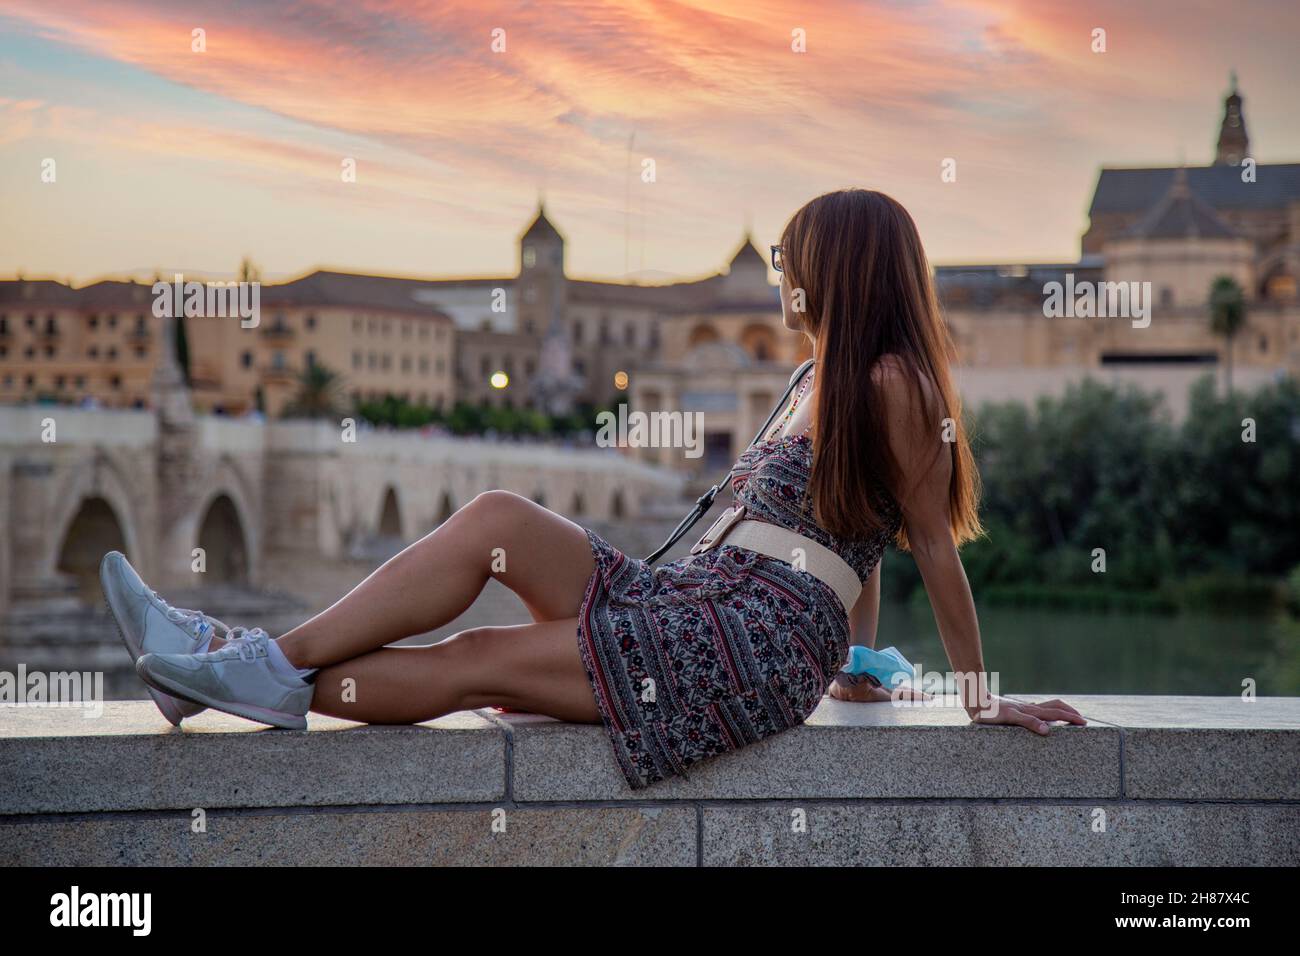 Brunette girl with long hair and summer dress looking at sunset at the Roman Bridge of Cordoba Stock Photo